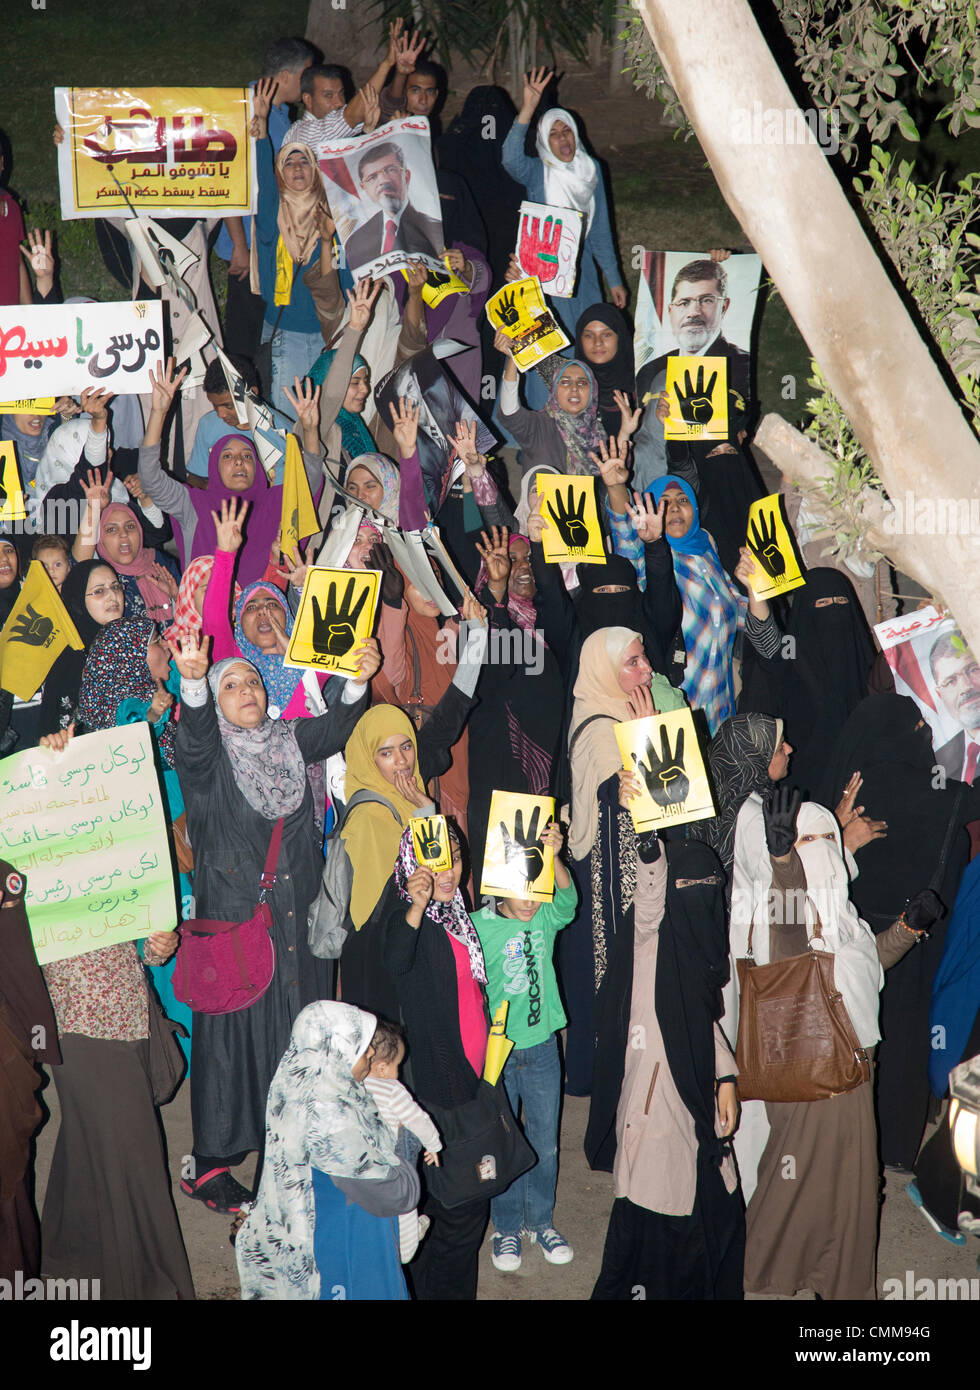 Cairo, Egypt . 05th Nov, 2013. men and veiled women demonstrate their support for deposed Egyptian president by marching through the Cairo suburb of Maadi Credit:  B.O'Kane/Alamy Live News Stock Photo